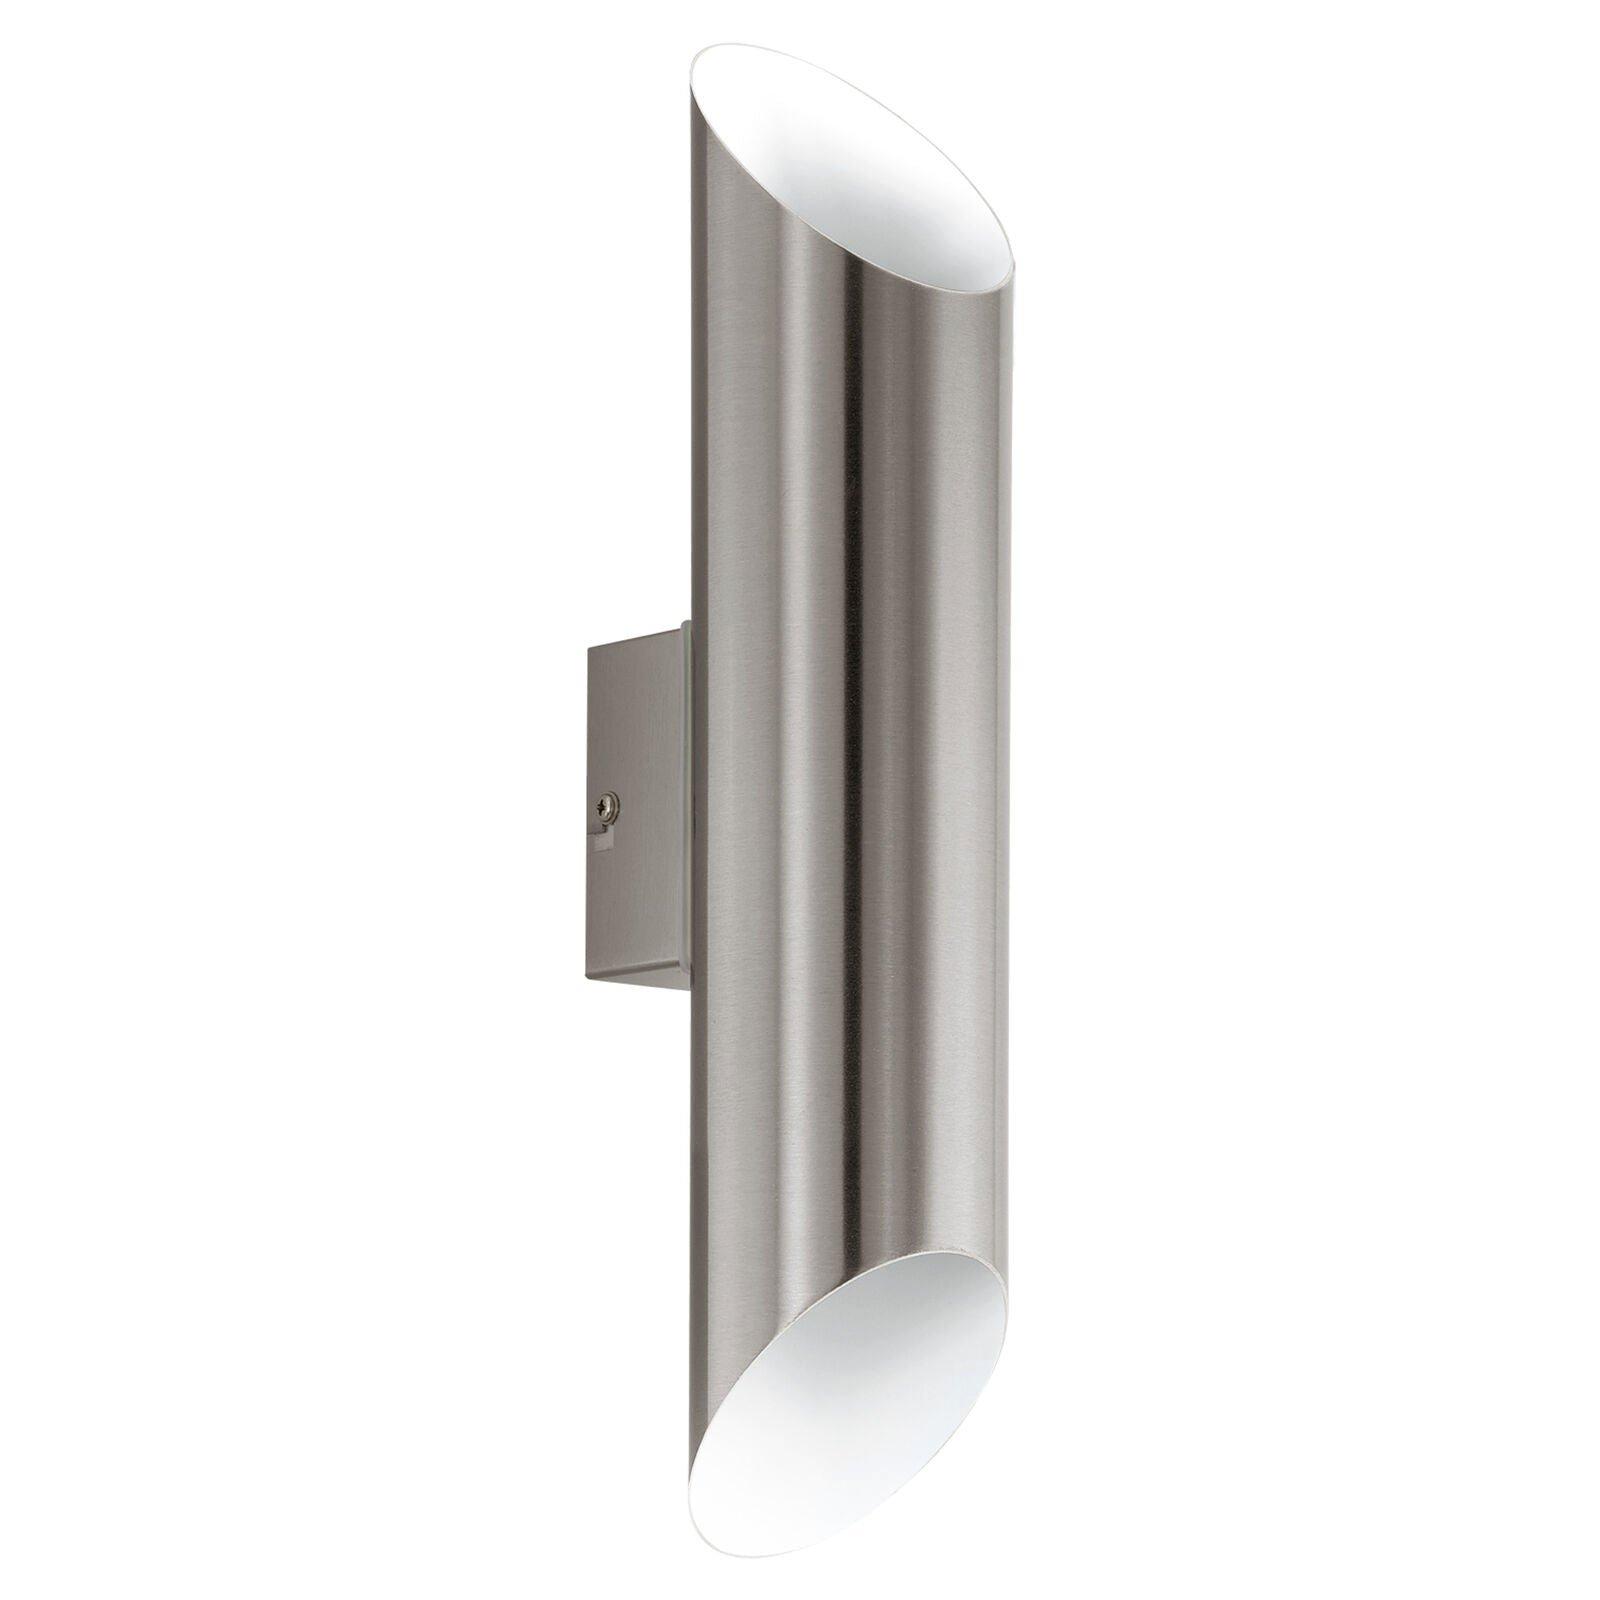 IP44 Outdoor Wall Light Stainless Steel & White 3.7W Built in LED Lamp